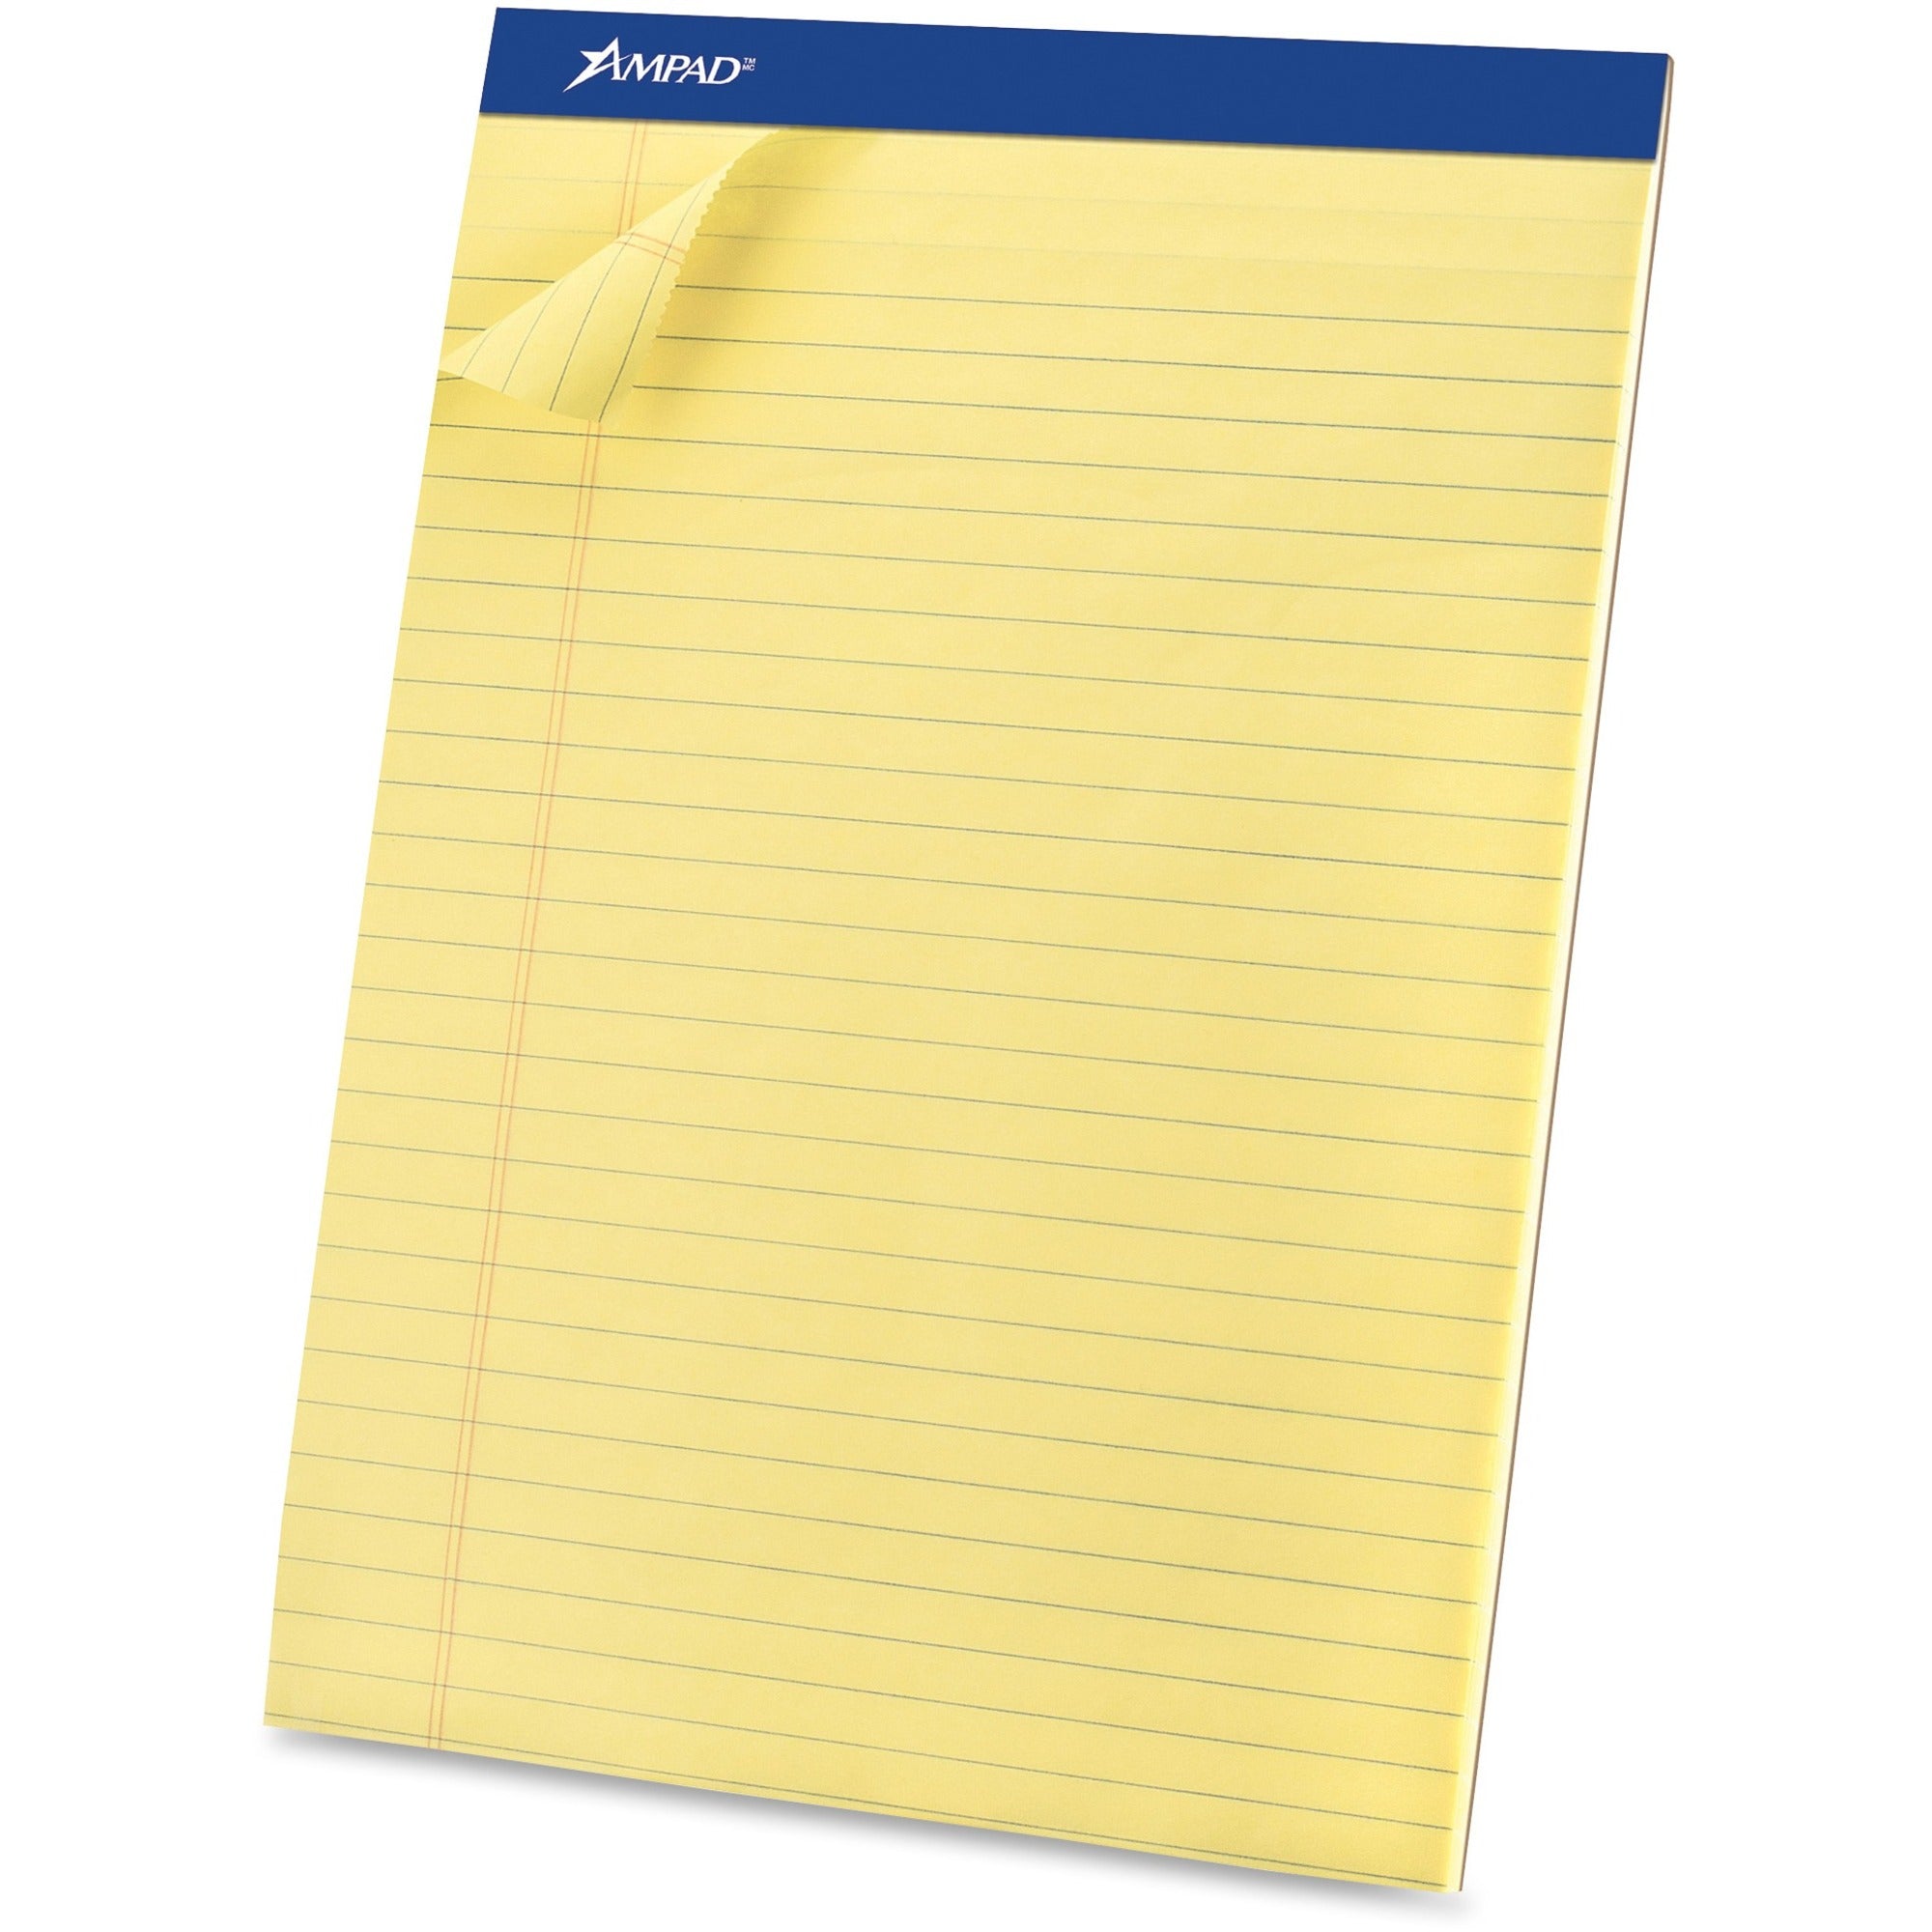 Ampad Basic Perforated Writing Pads - Legal - 